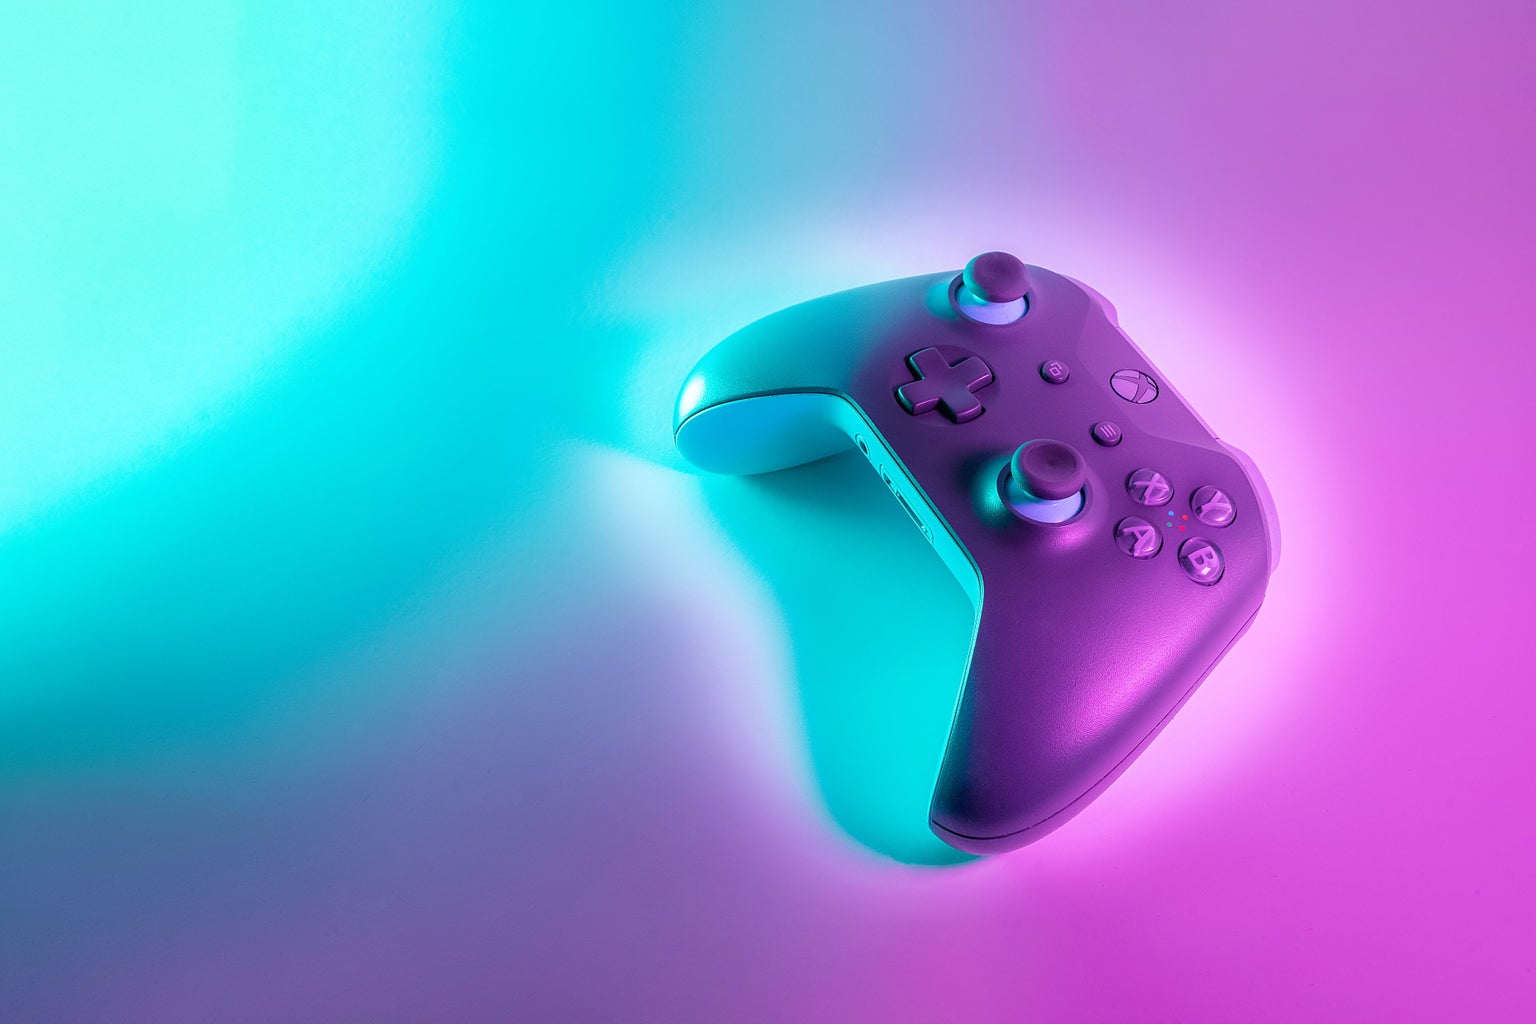 Black controller against a blue and purple background